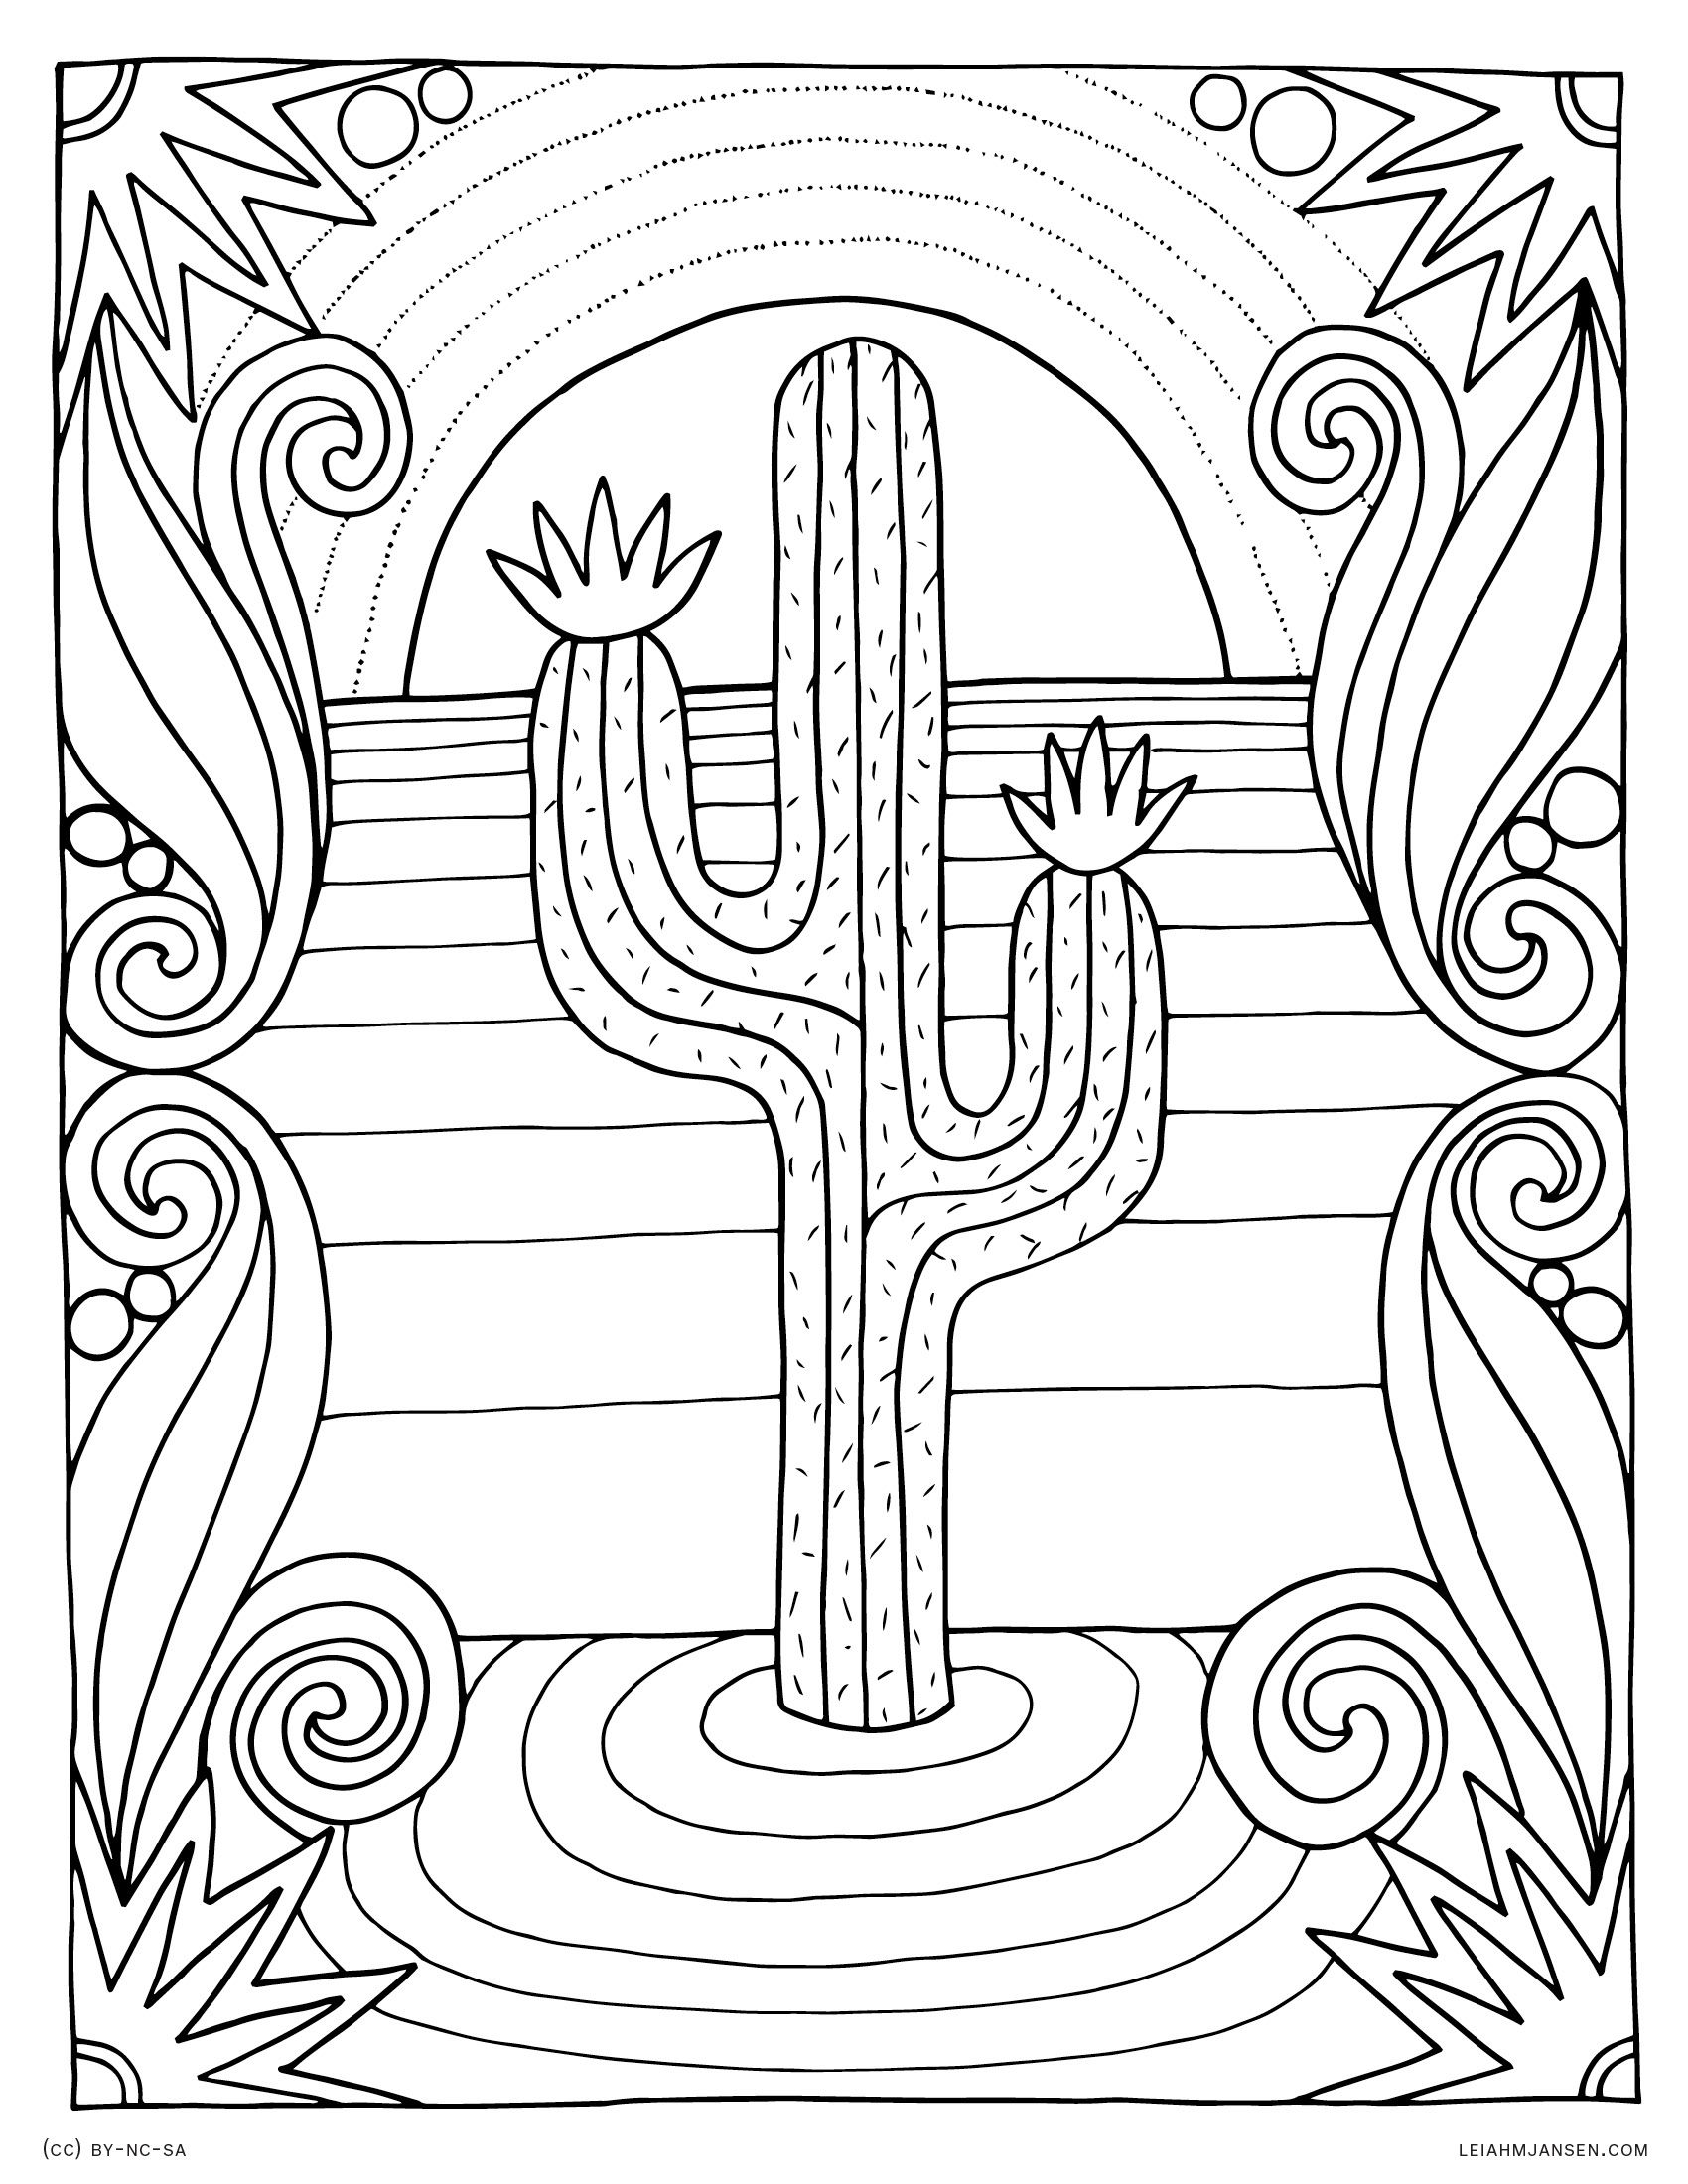 printable coloring pages of sunsets